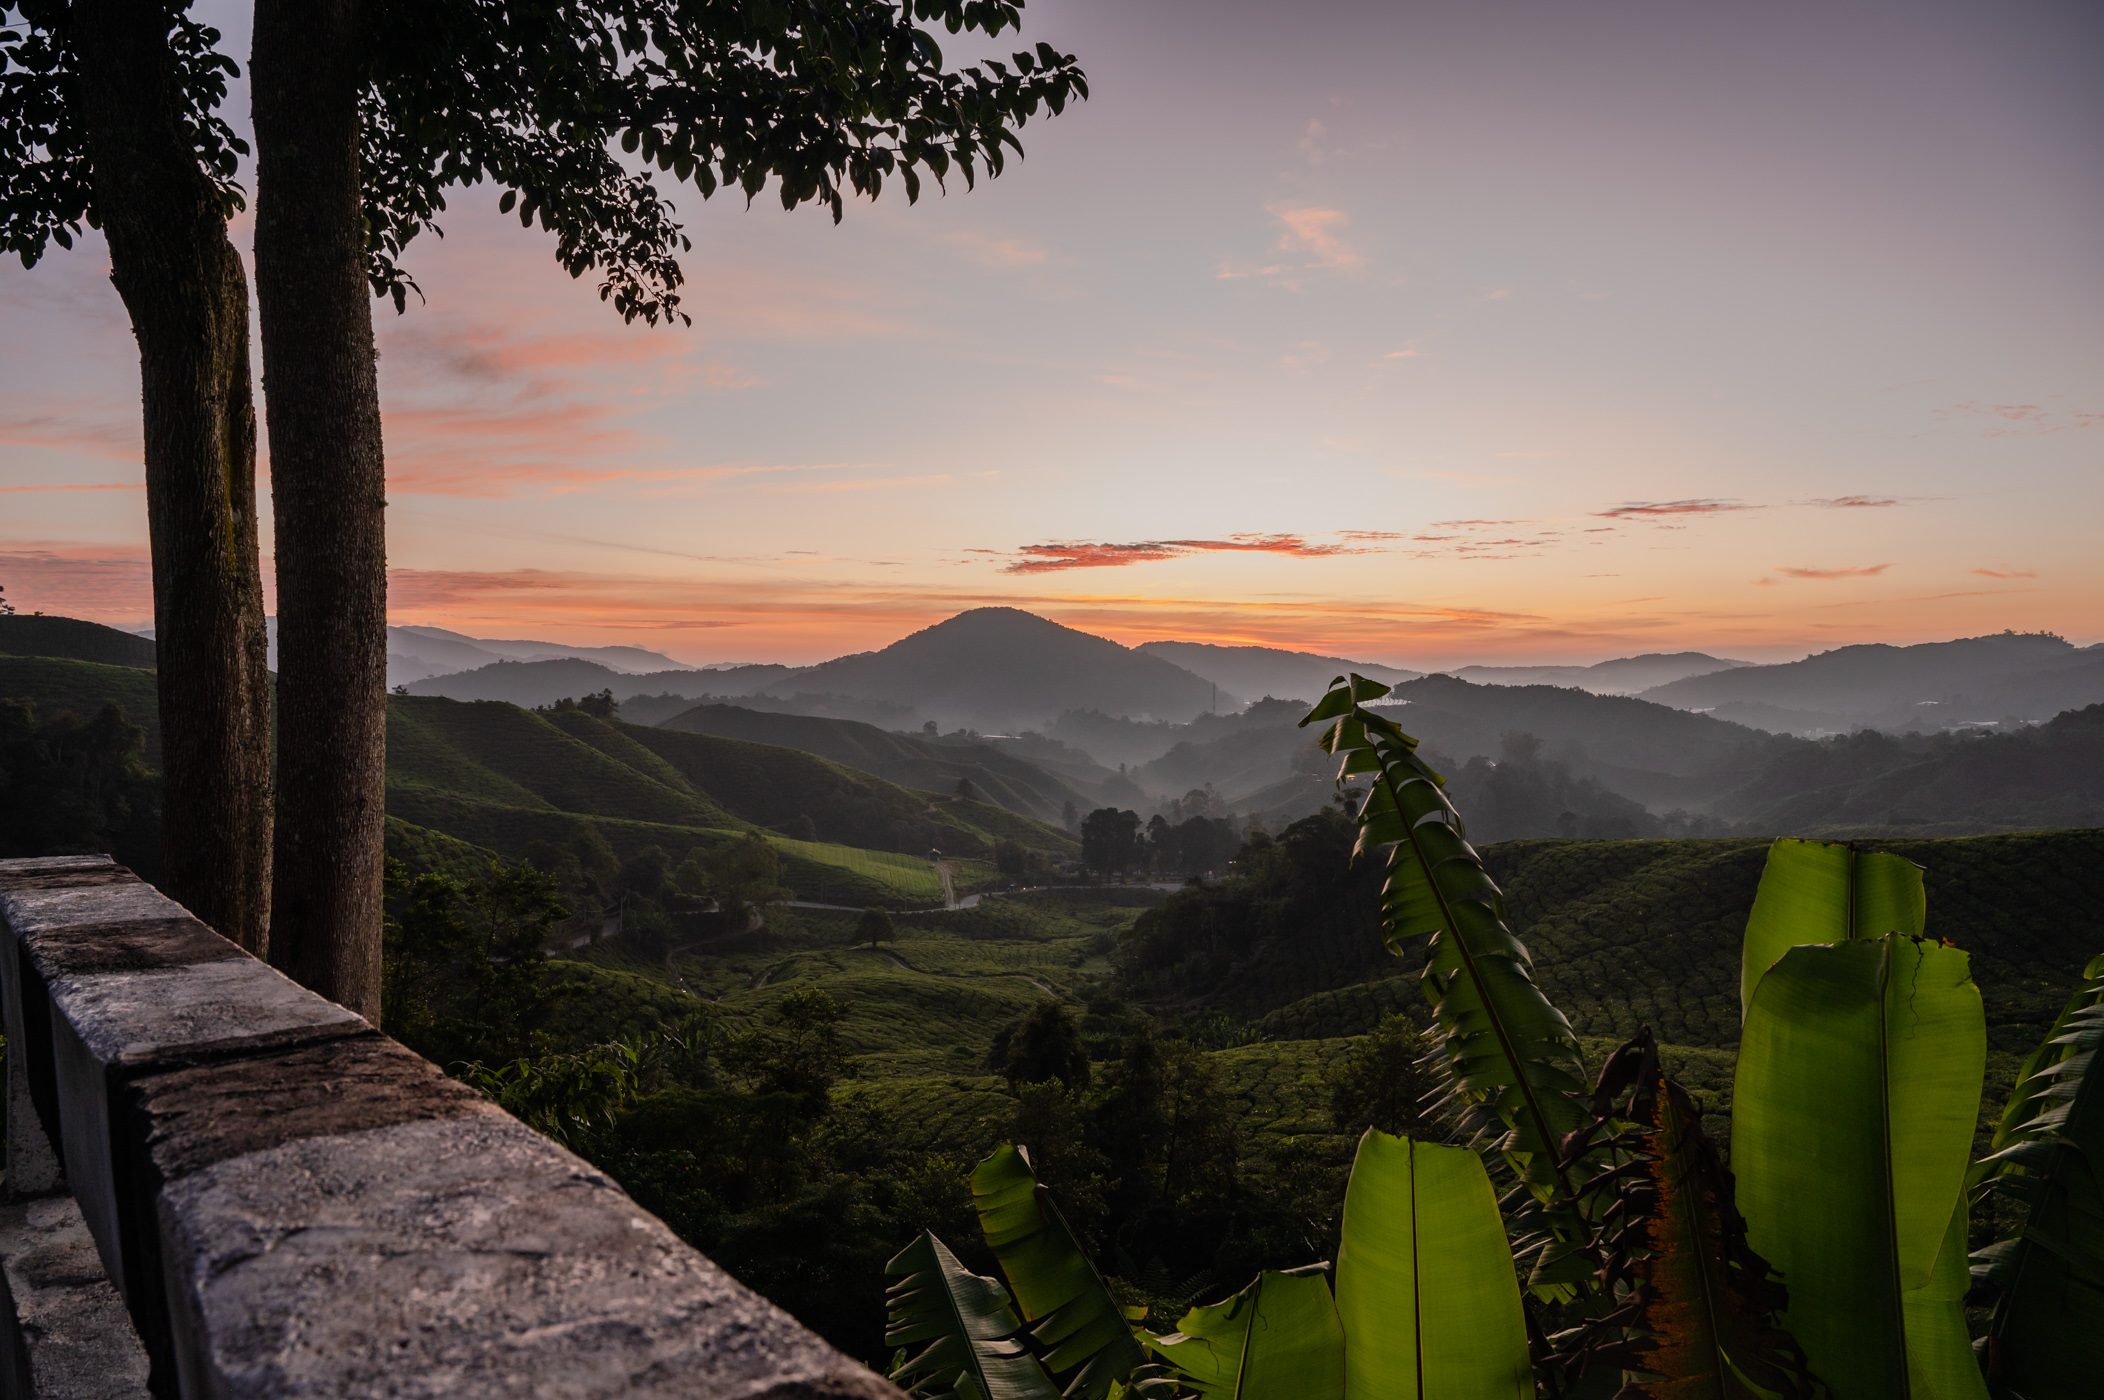 Sunrise over the tea plantations at Cameron Highlands - part of a 3 week Malaysia itinerary